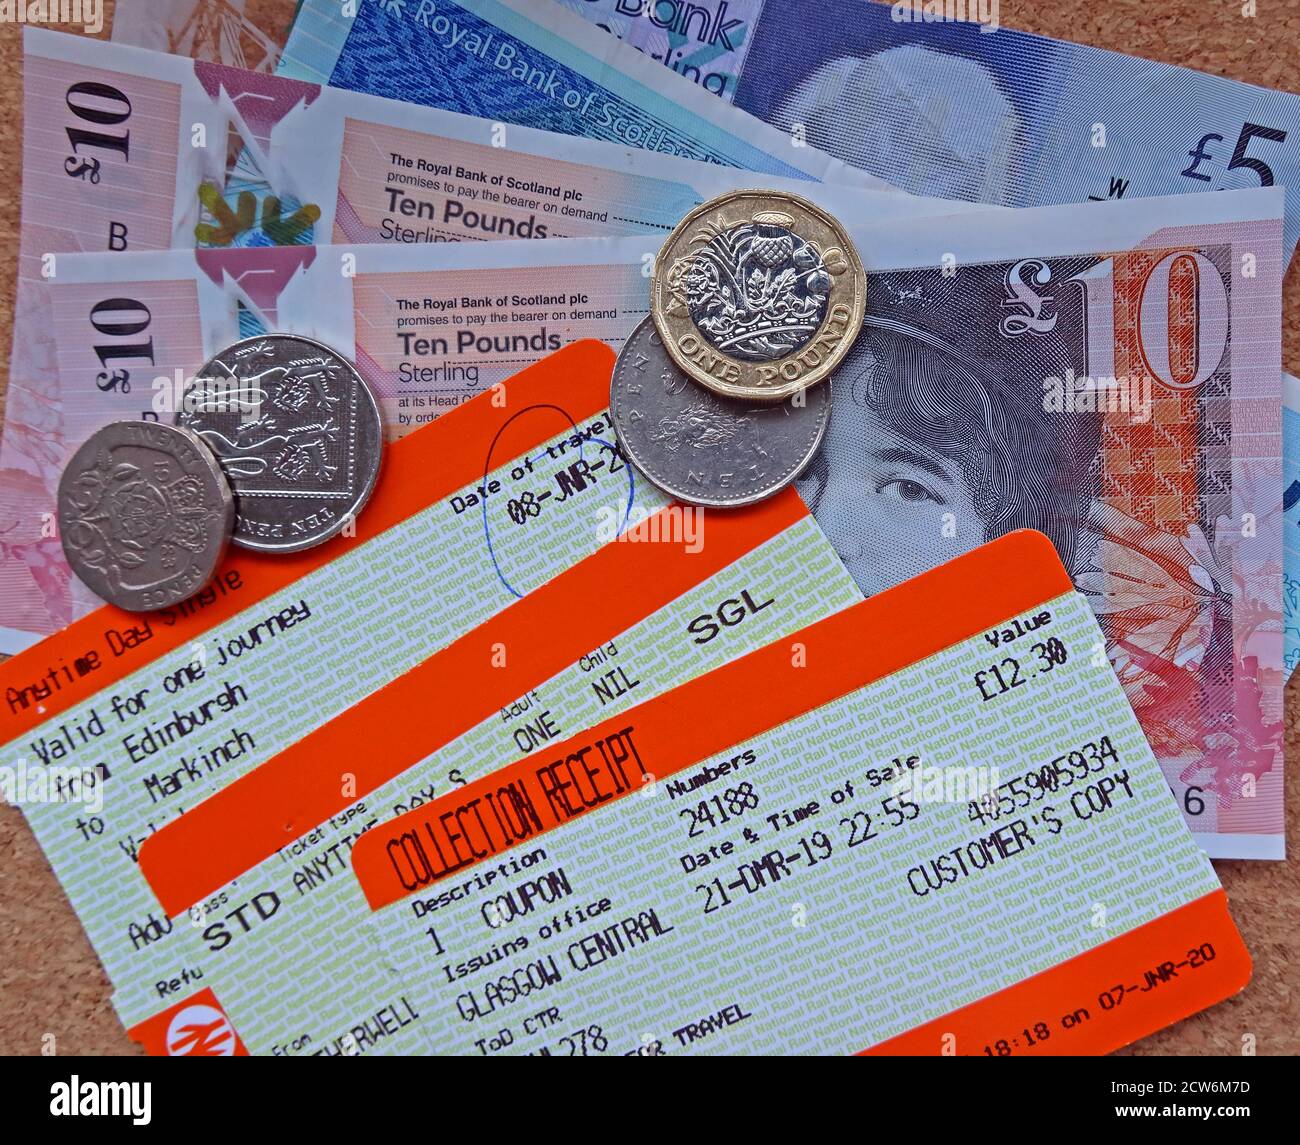 Scotrail tickets, with Scottish Notes and coins, increasing cost of train travel and season tickets, Scotland, UK Stock Photo